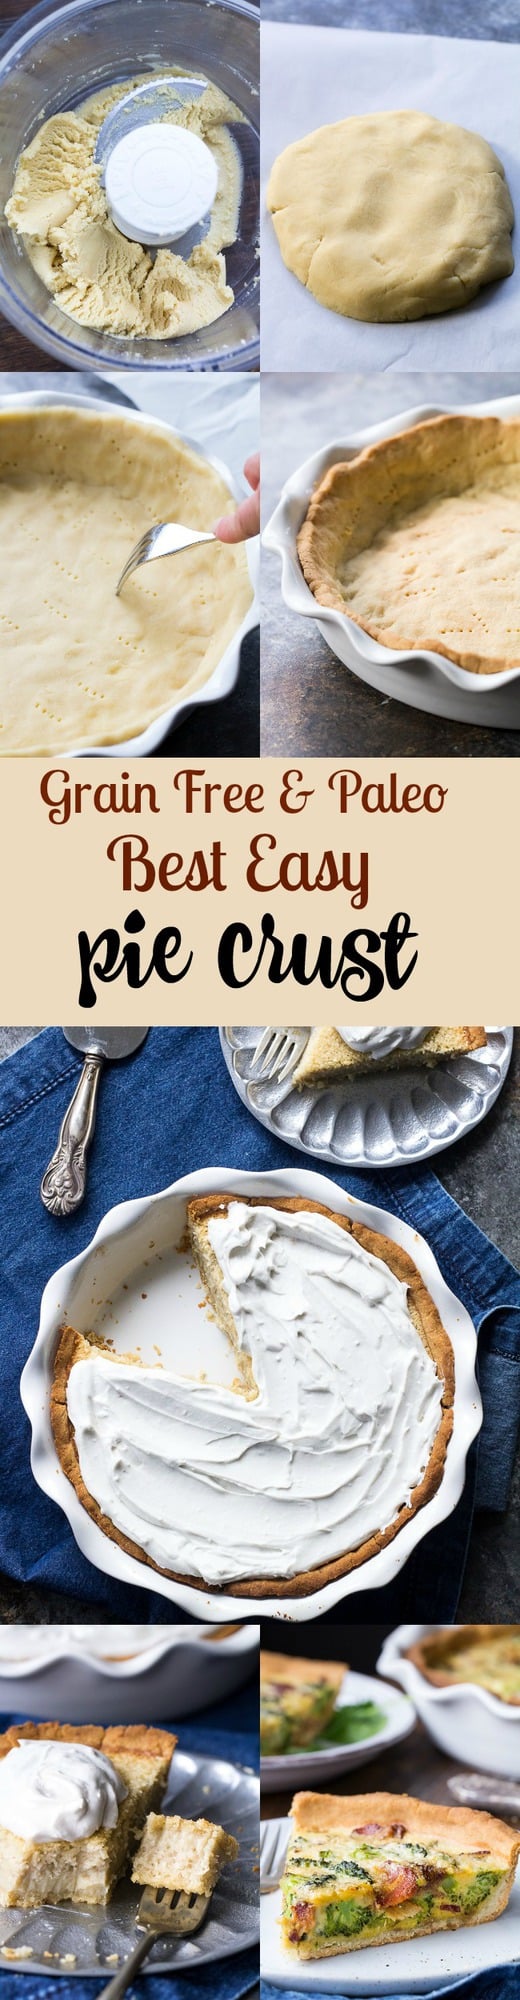 The best easy paleo pie crust for your favorite dessert pies or savory pies and quiches! The dough comes together in minutes in a blender and is gluten free, grain free, dairy free, family approved, and very versatile.